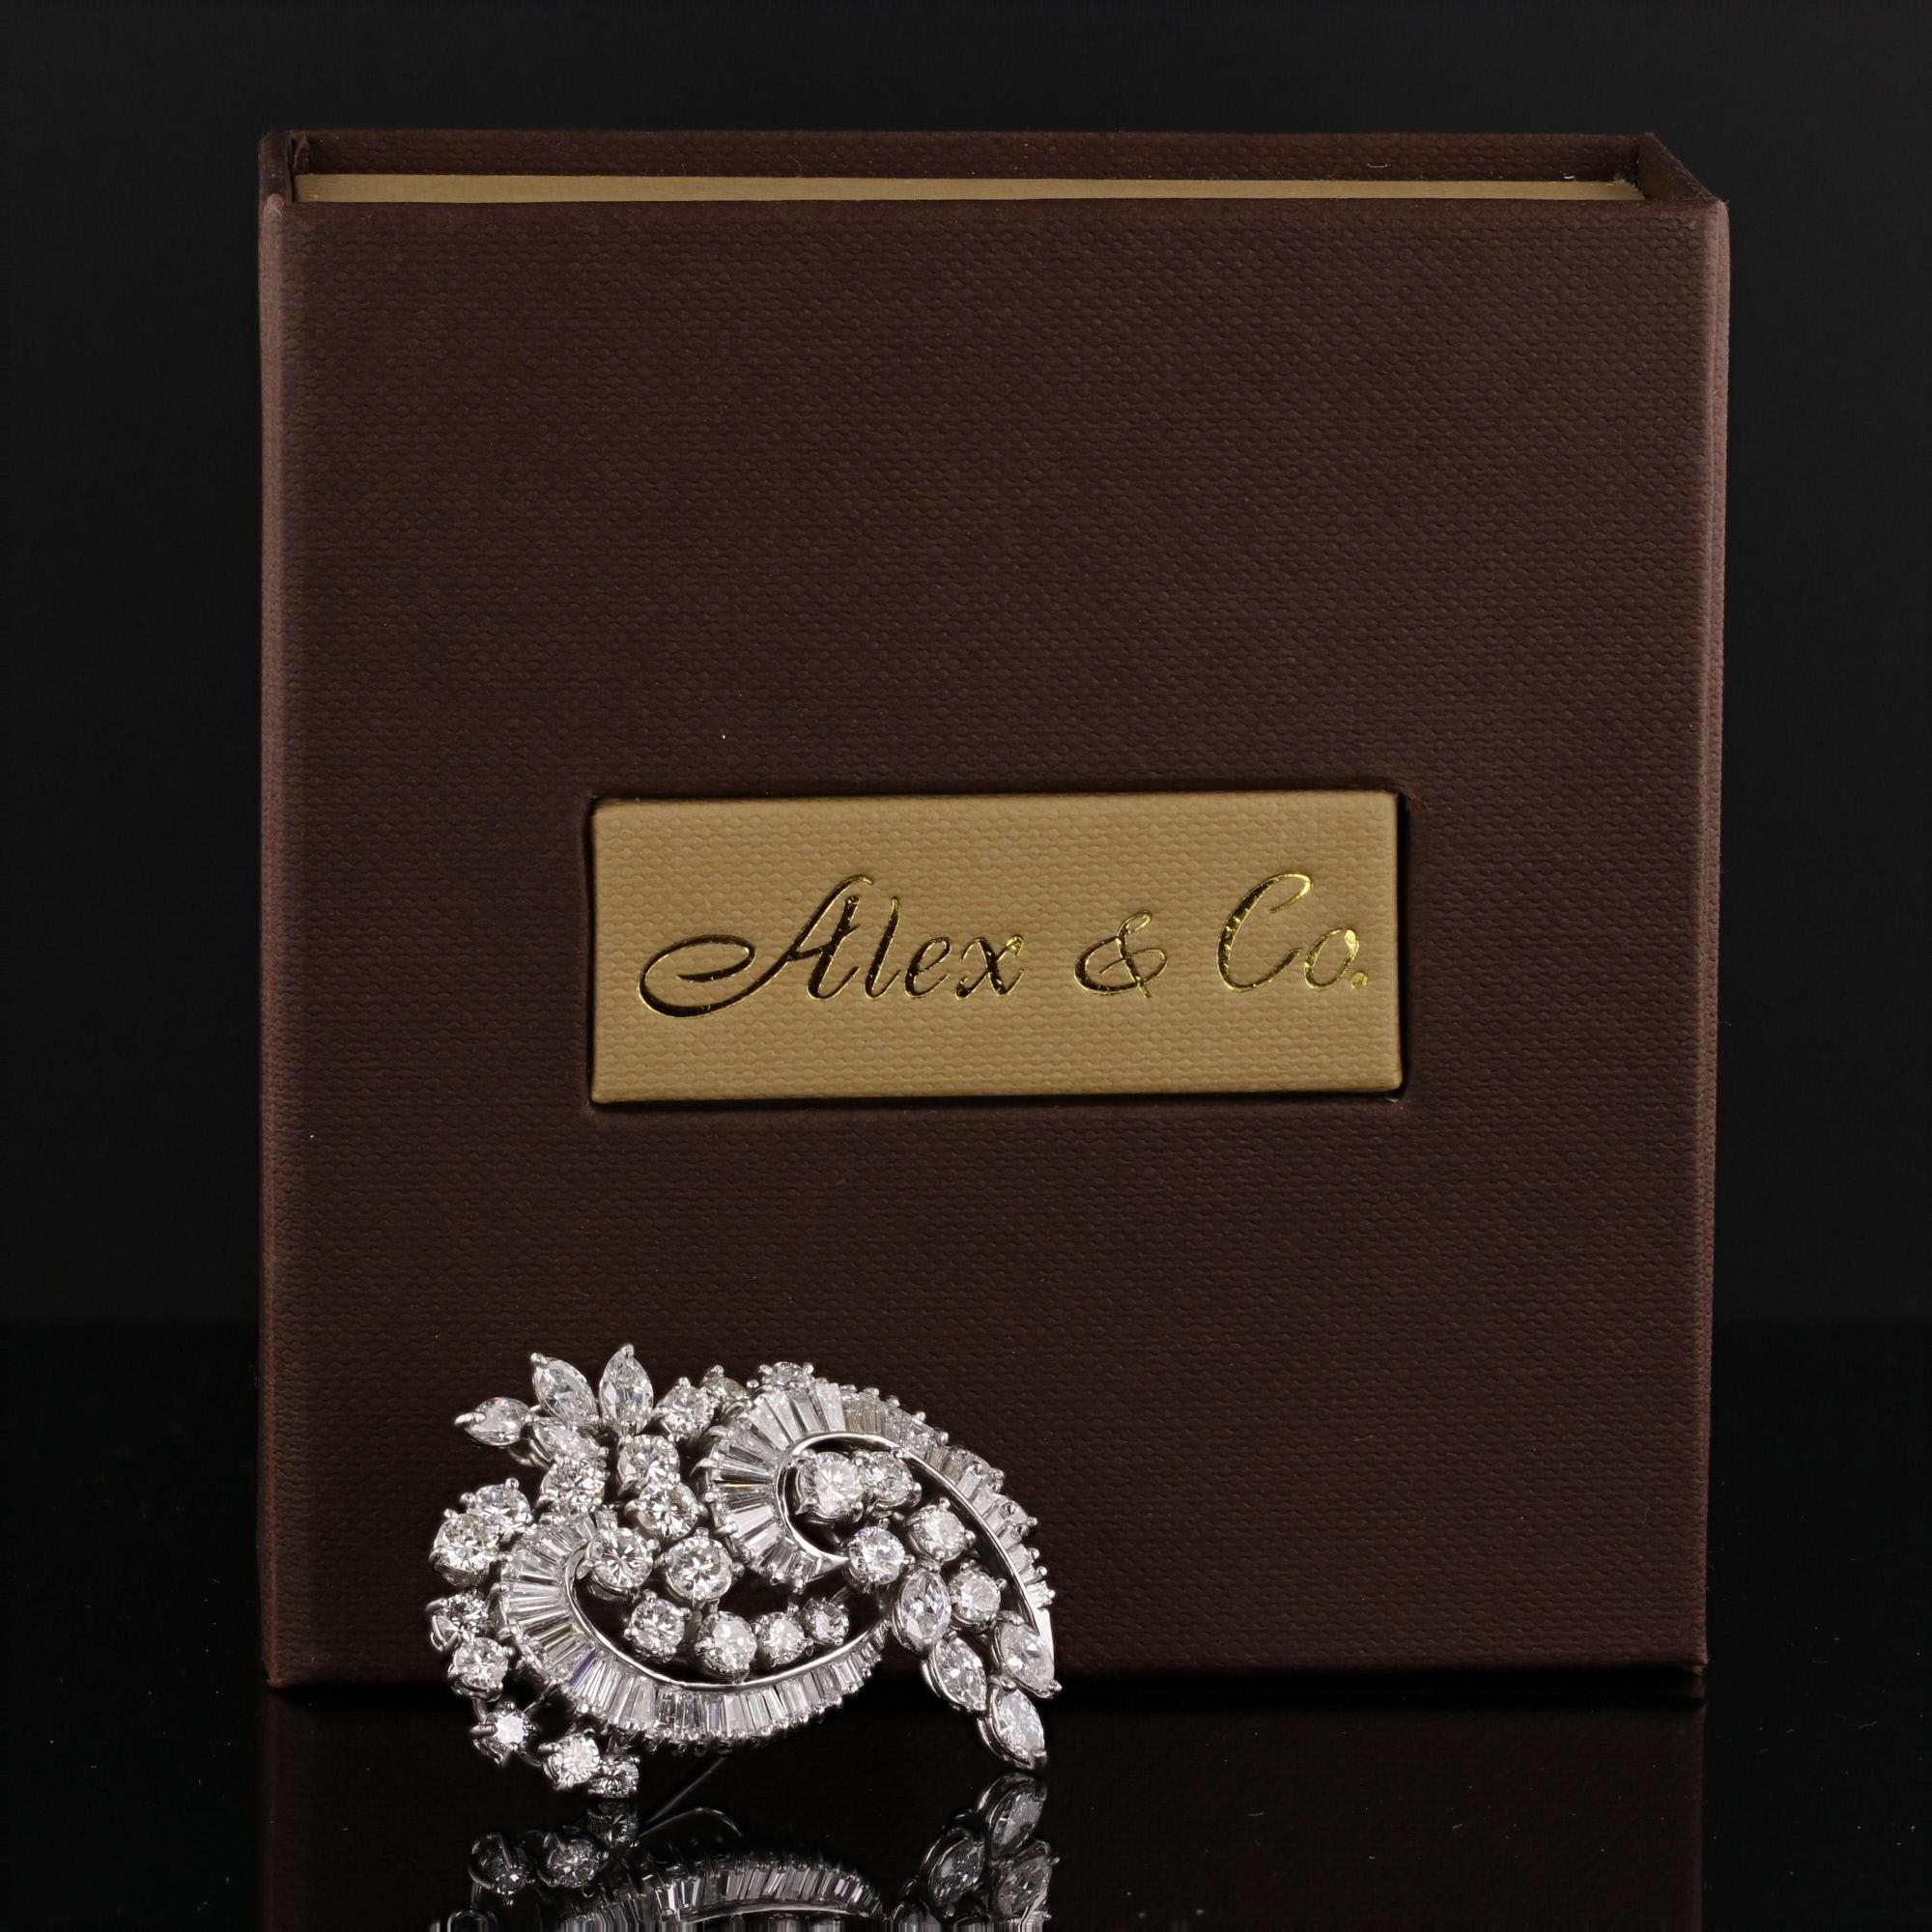 This outstanding brooch/pendant is crafted in solid platinum by renowned designer Elwood Van Clief, offered by Alex & Co.  This estate piece from the 1950's era features 26 round brilliant cut diamonds, 10 marquise shaped diamonds and 48 baguettes.